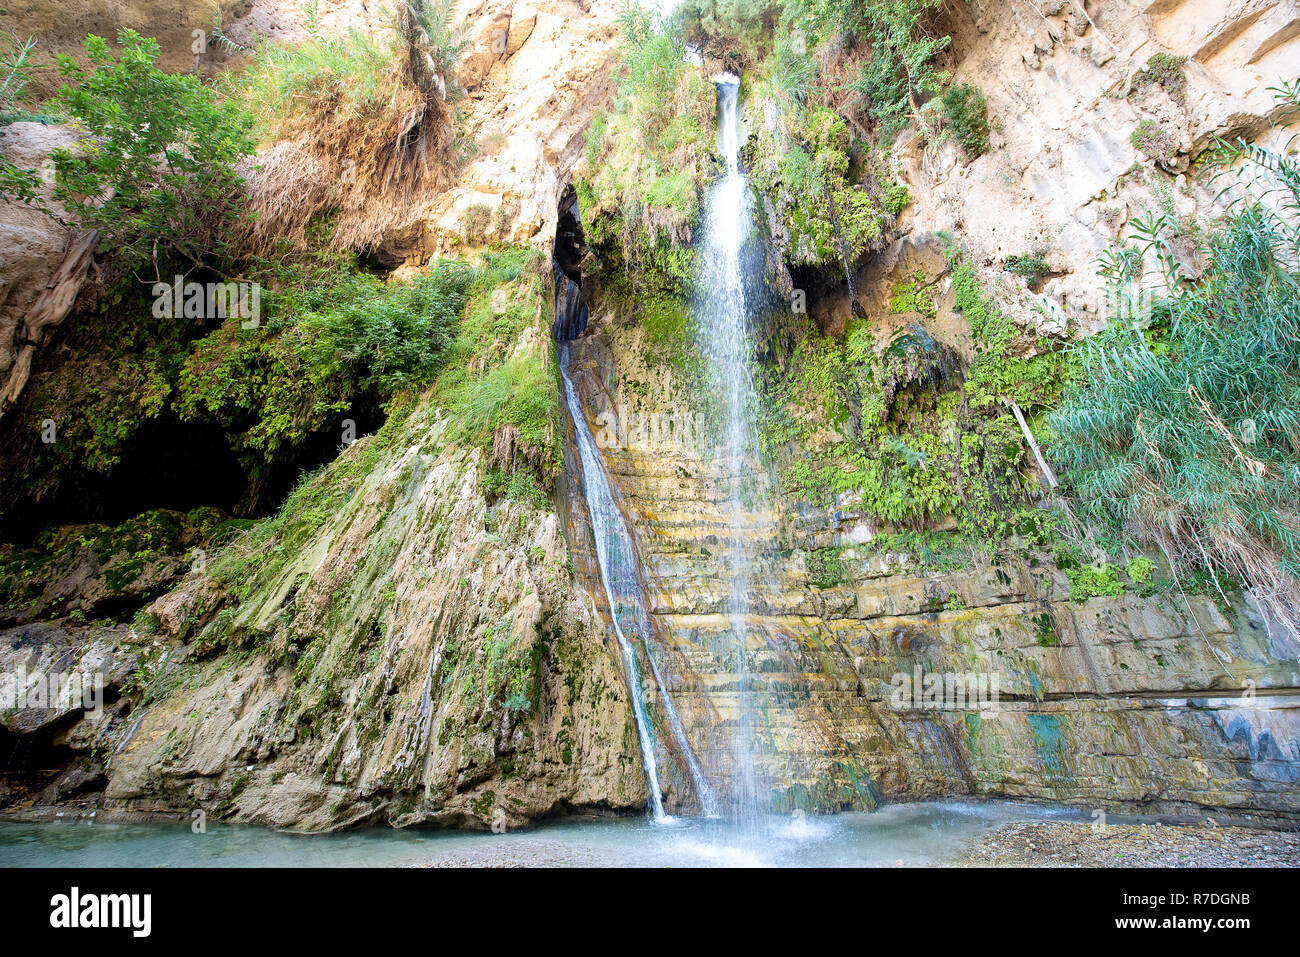 A view of the Nahal David Waterfall, Ein Gedi, Israel Stock Photo